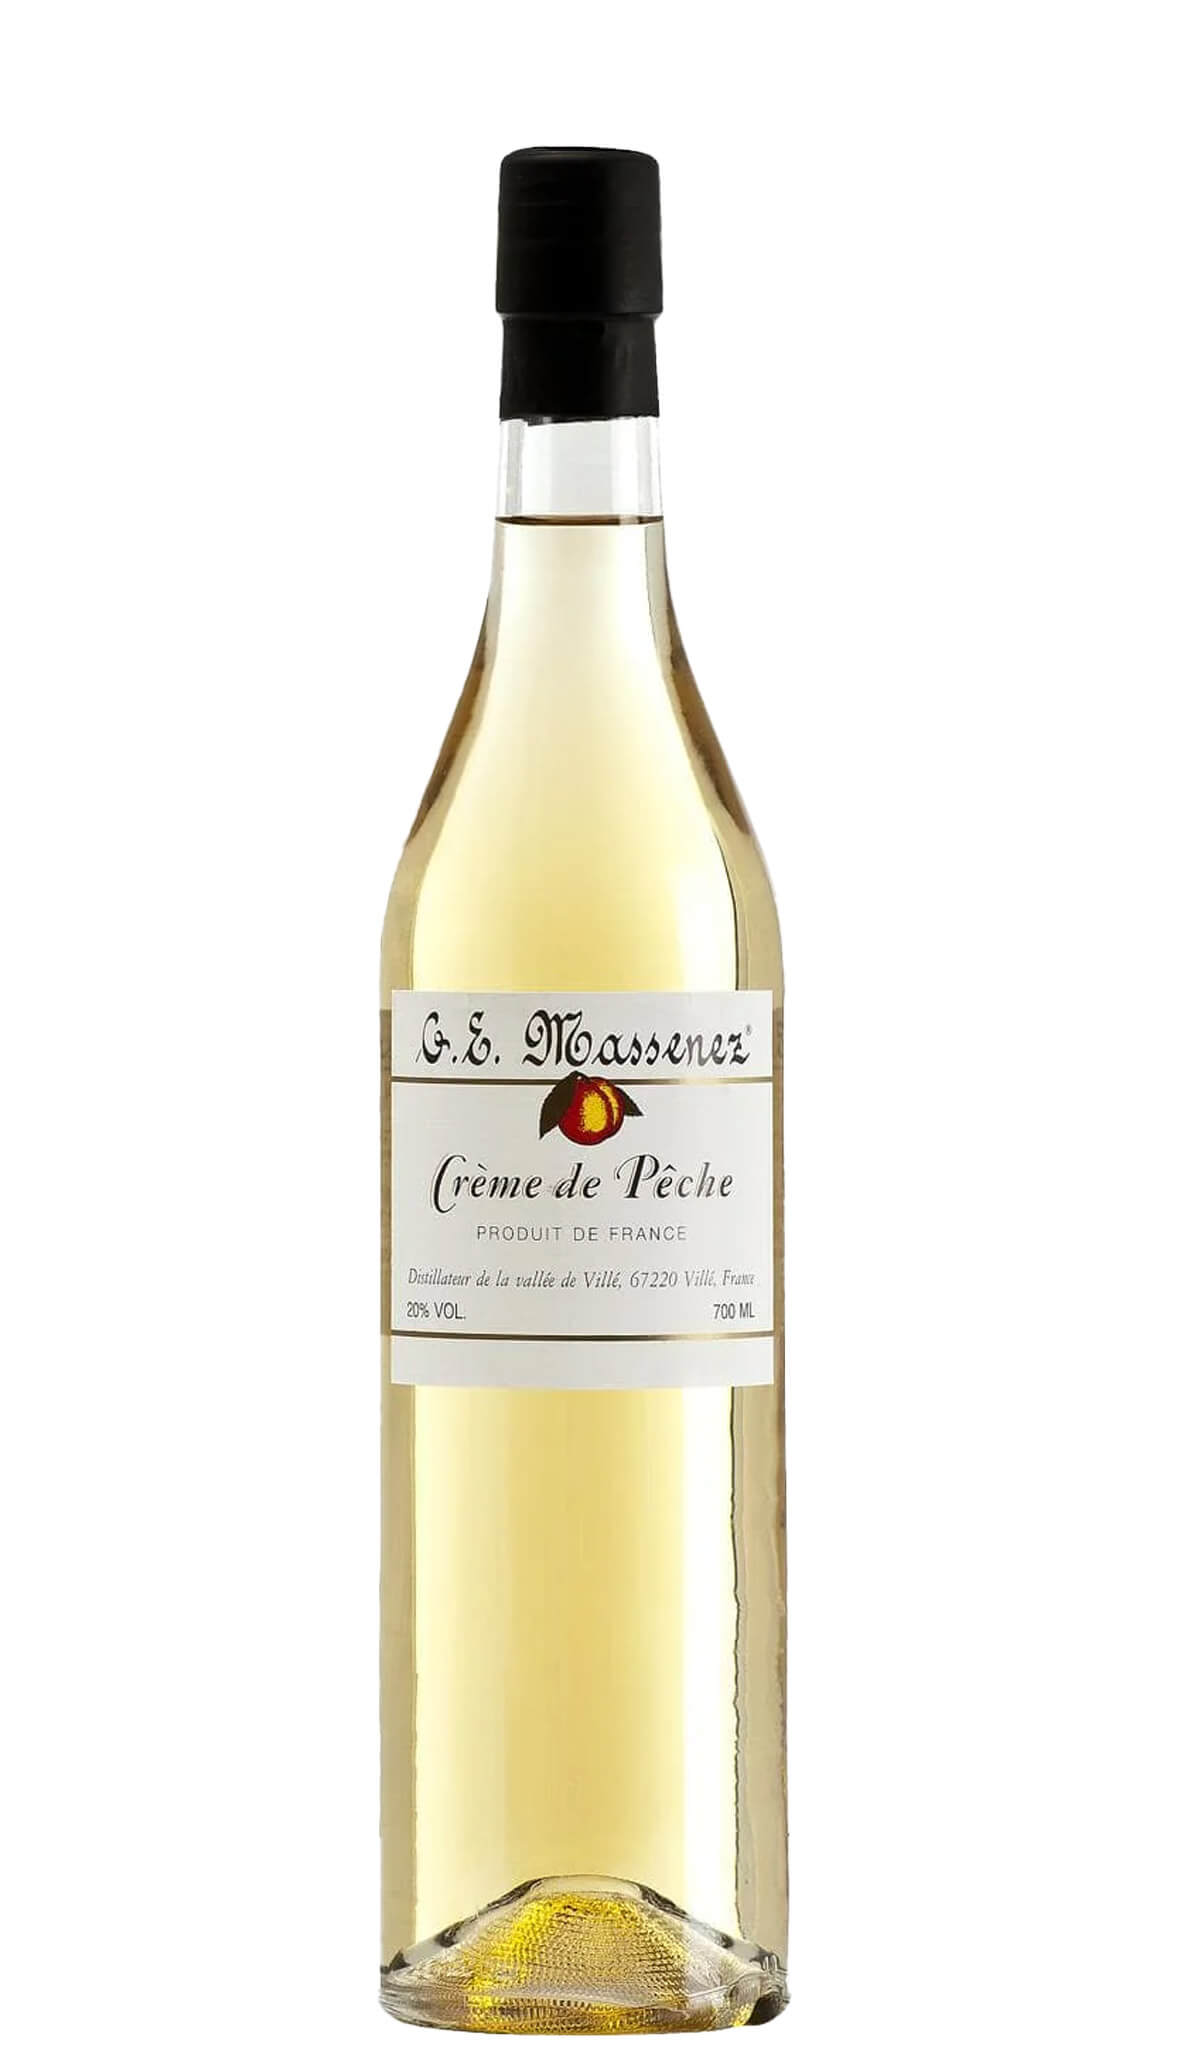 Find out more, explore the range and buy Massenez Creme De Peche (Peach Cream) 500mL available online at Wine Sellers Direct - Australia's independent liquor specialists.